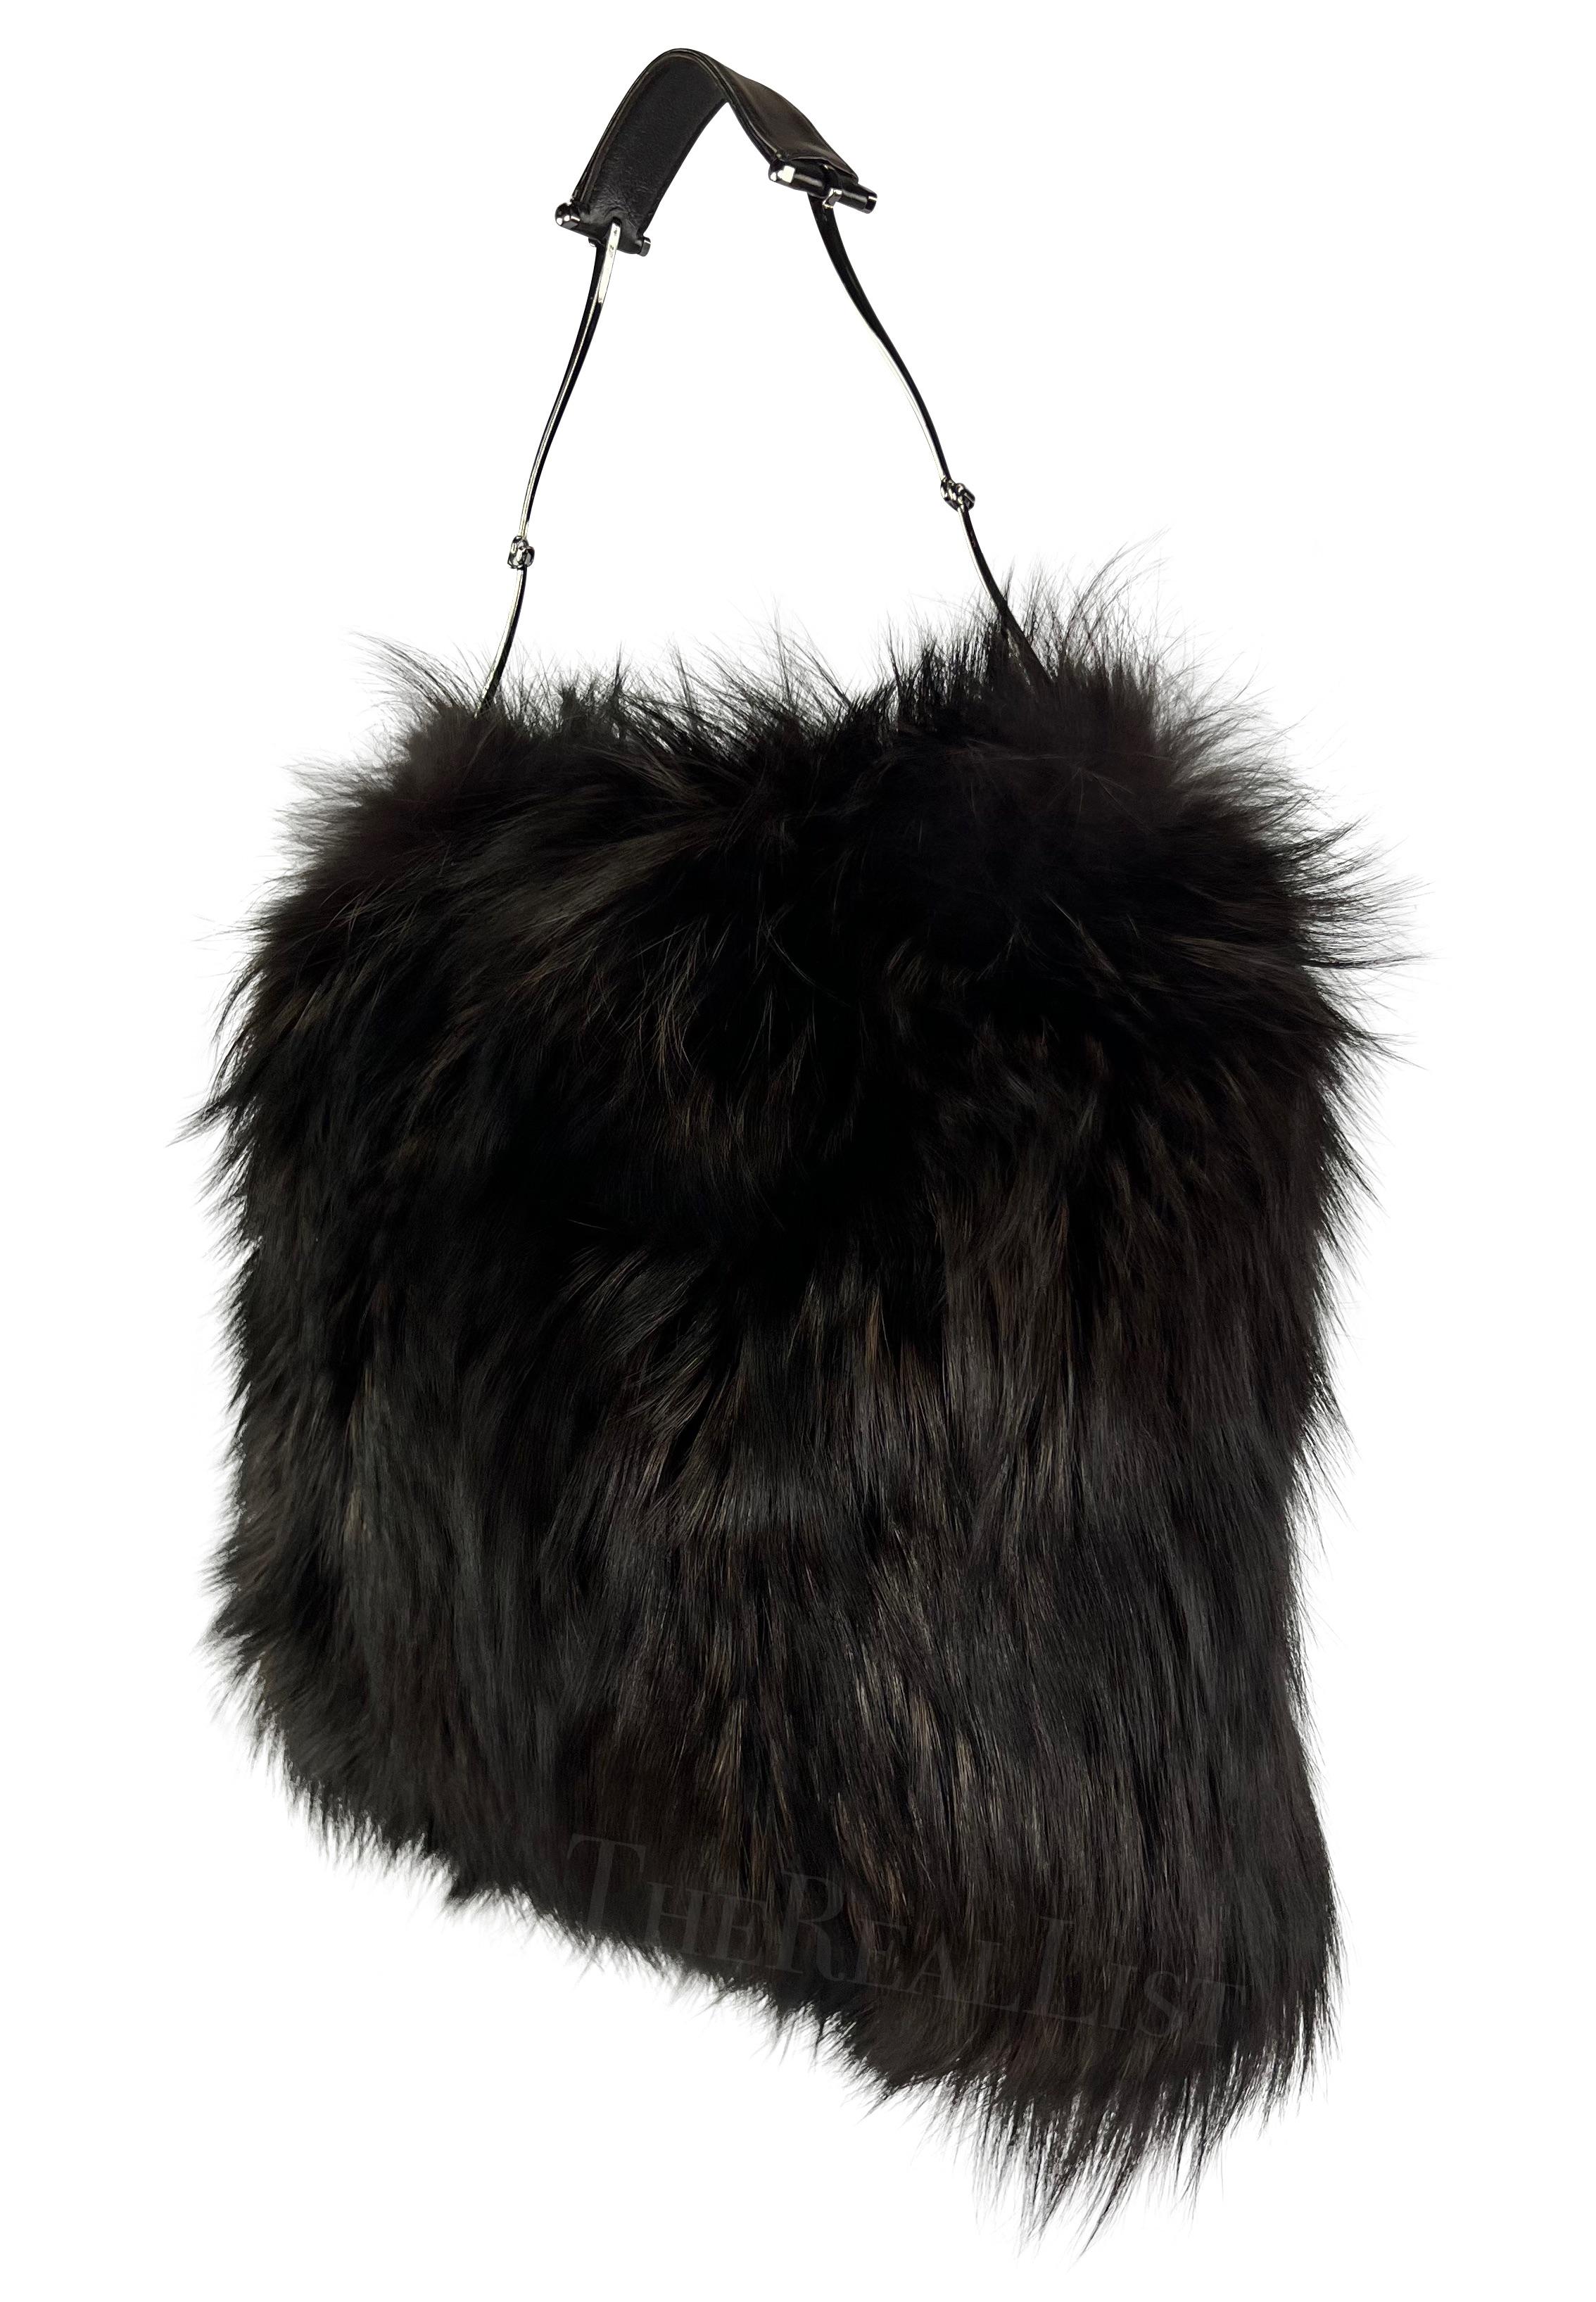 Presentingan incredible brown fox fur Gucci shoulder bag, designed by Tom Ford. From the iconic Fall/Winter 1997 collection, this opulent piece boasts a sleek horsebit shoulder strap and is meticulously crafted from sumptuous fox fur. A true gem in